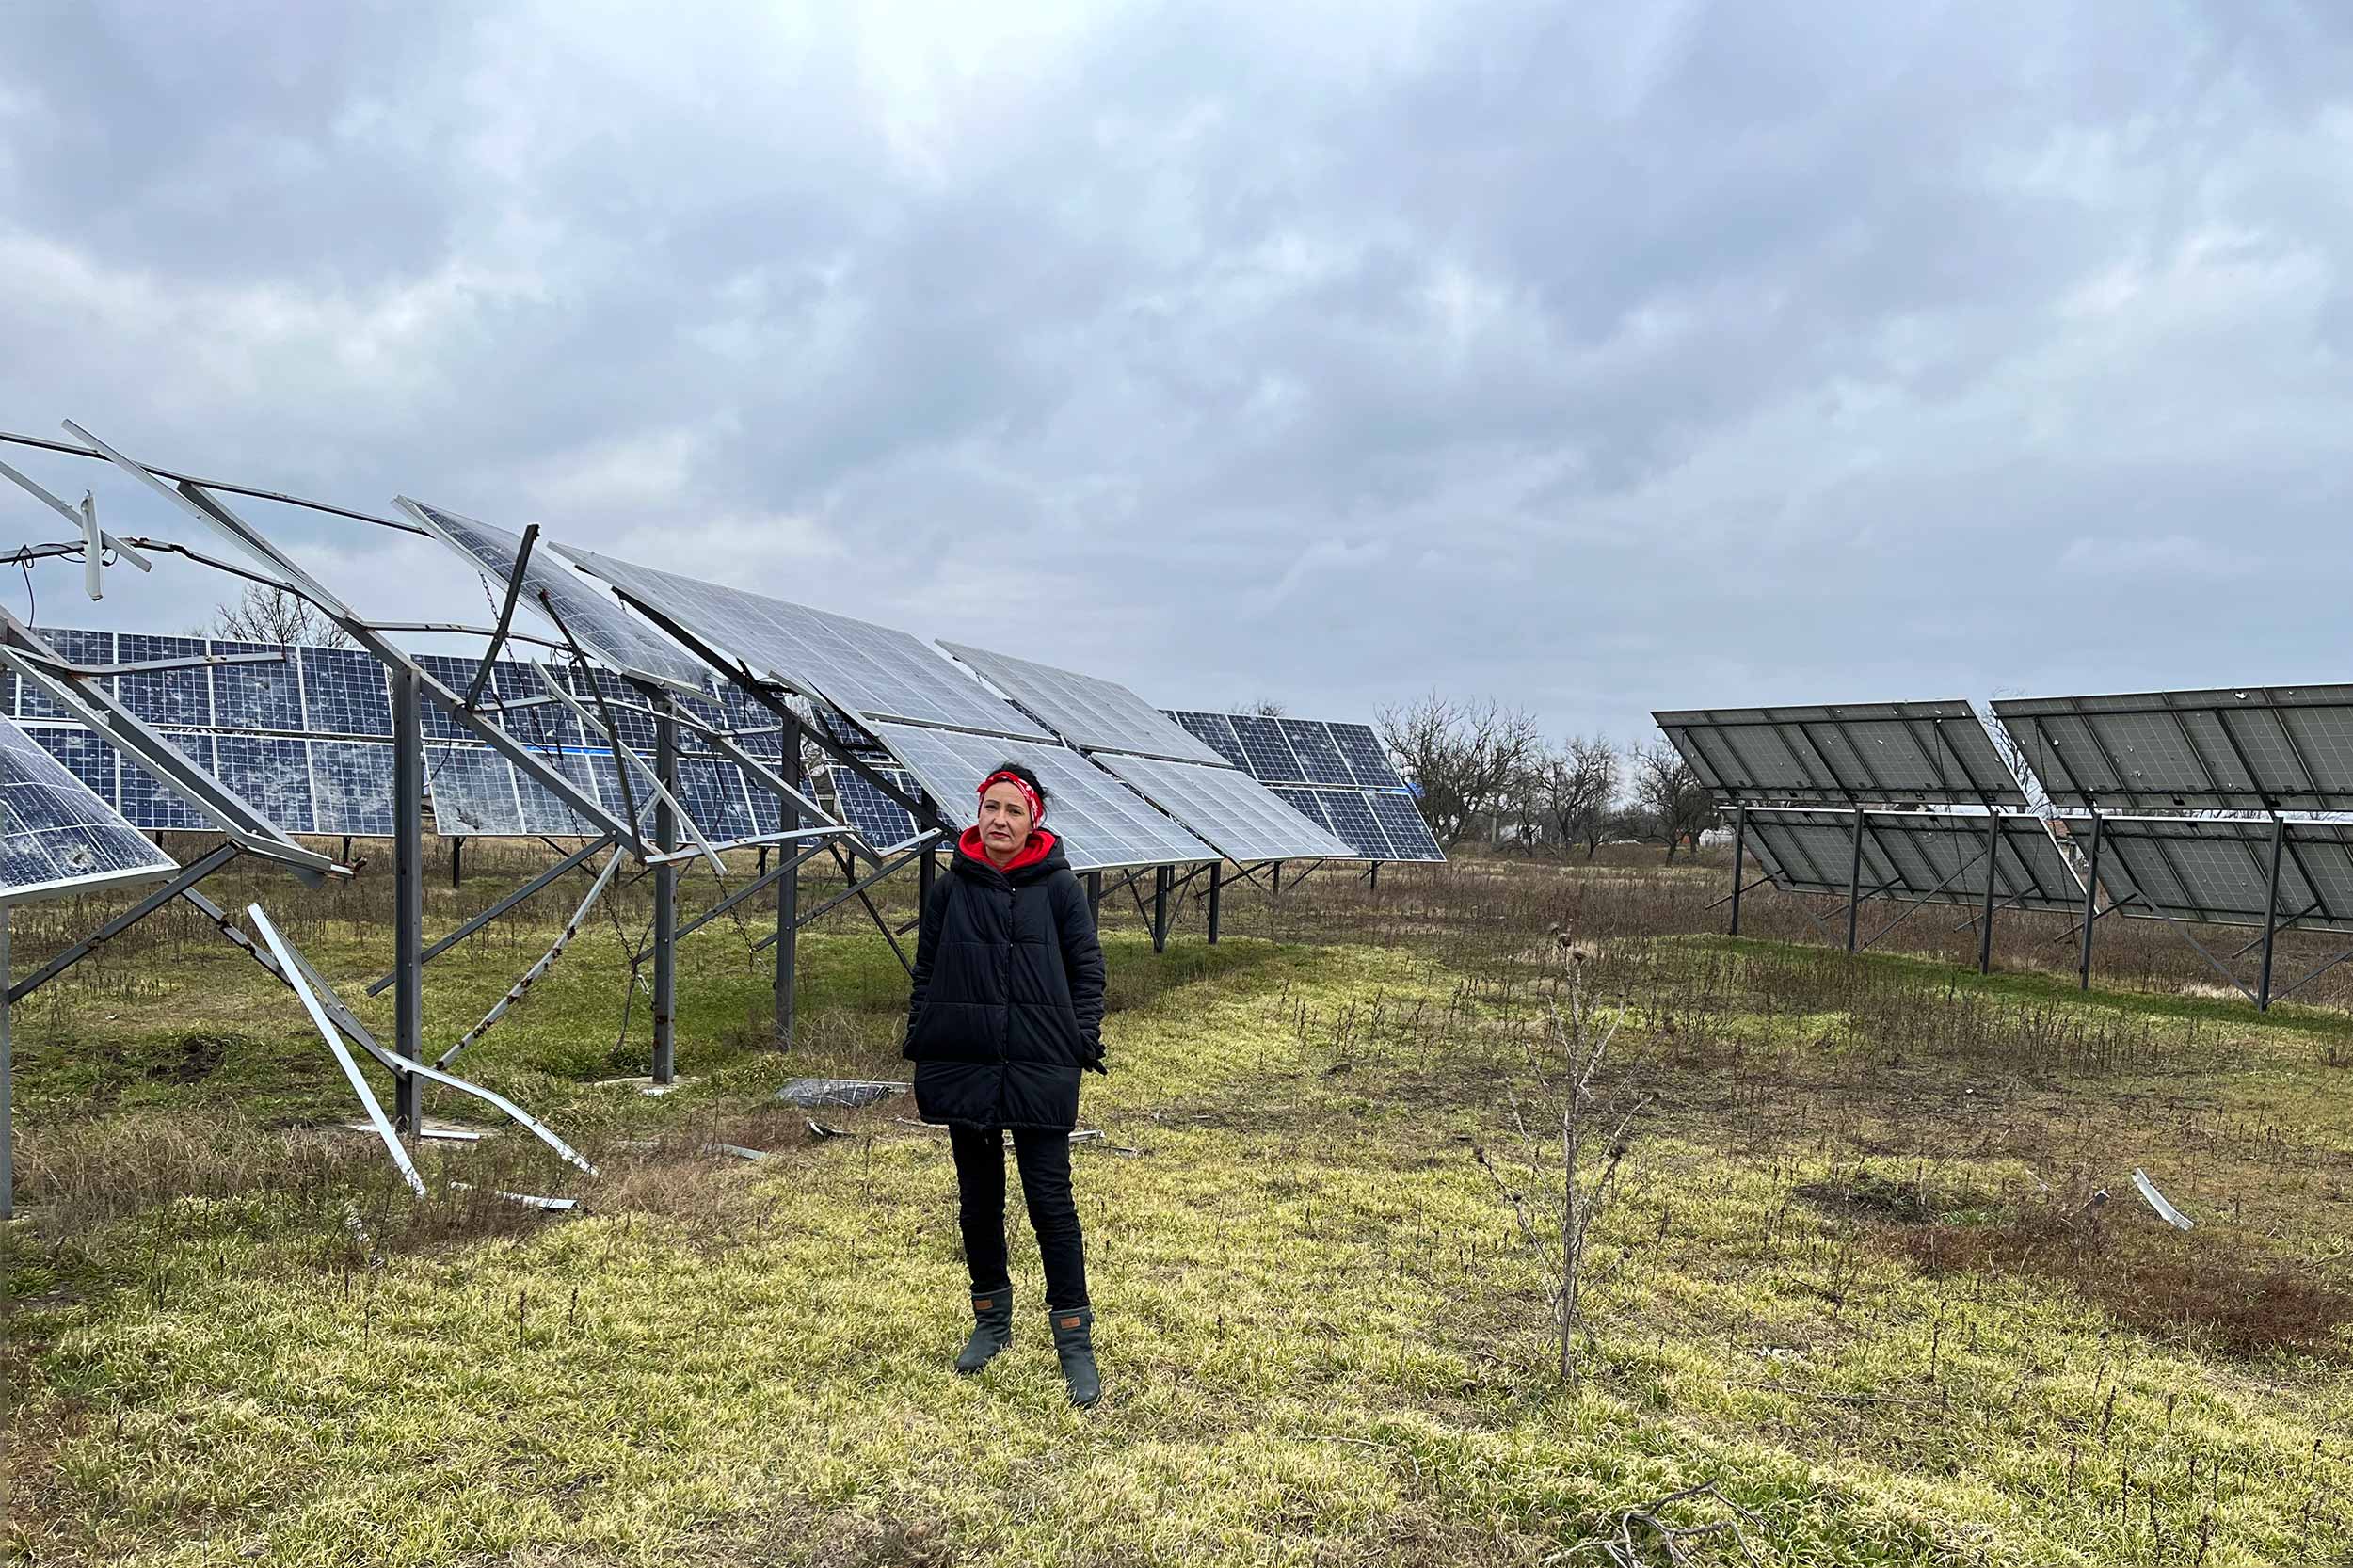 Yalovenko family's investment in solar panels located in a small field behind their house was devastated by Russian shelling and is now useless and irreparable. © IWPR